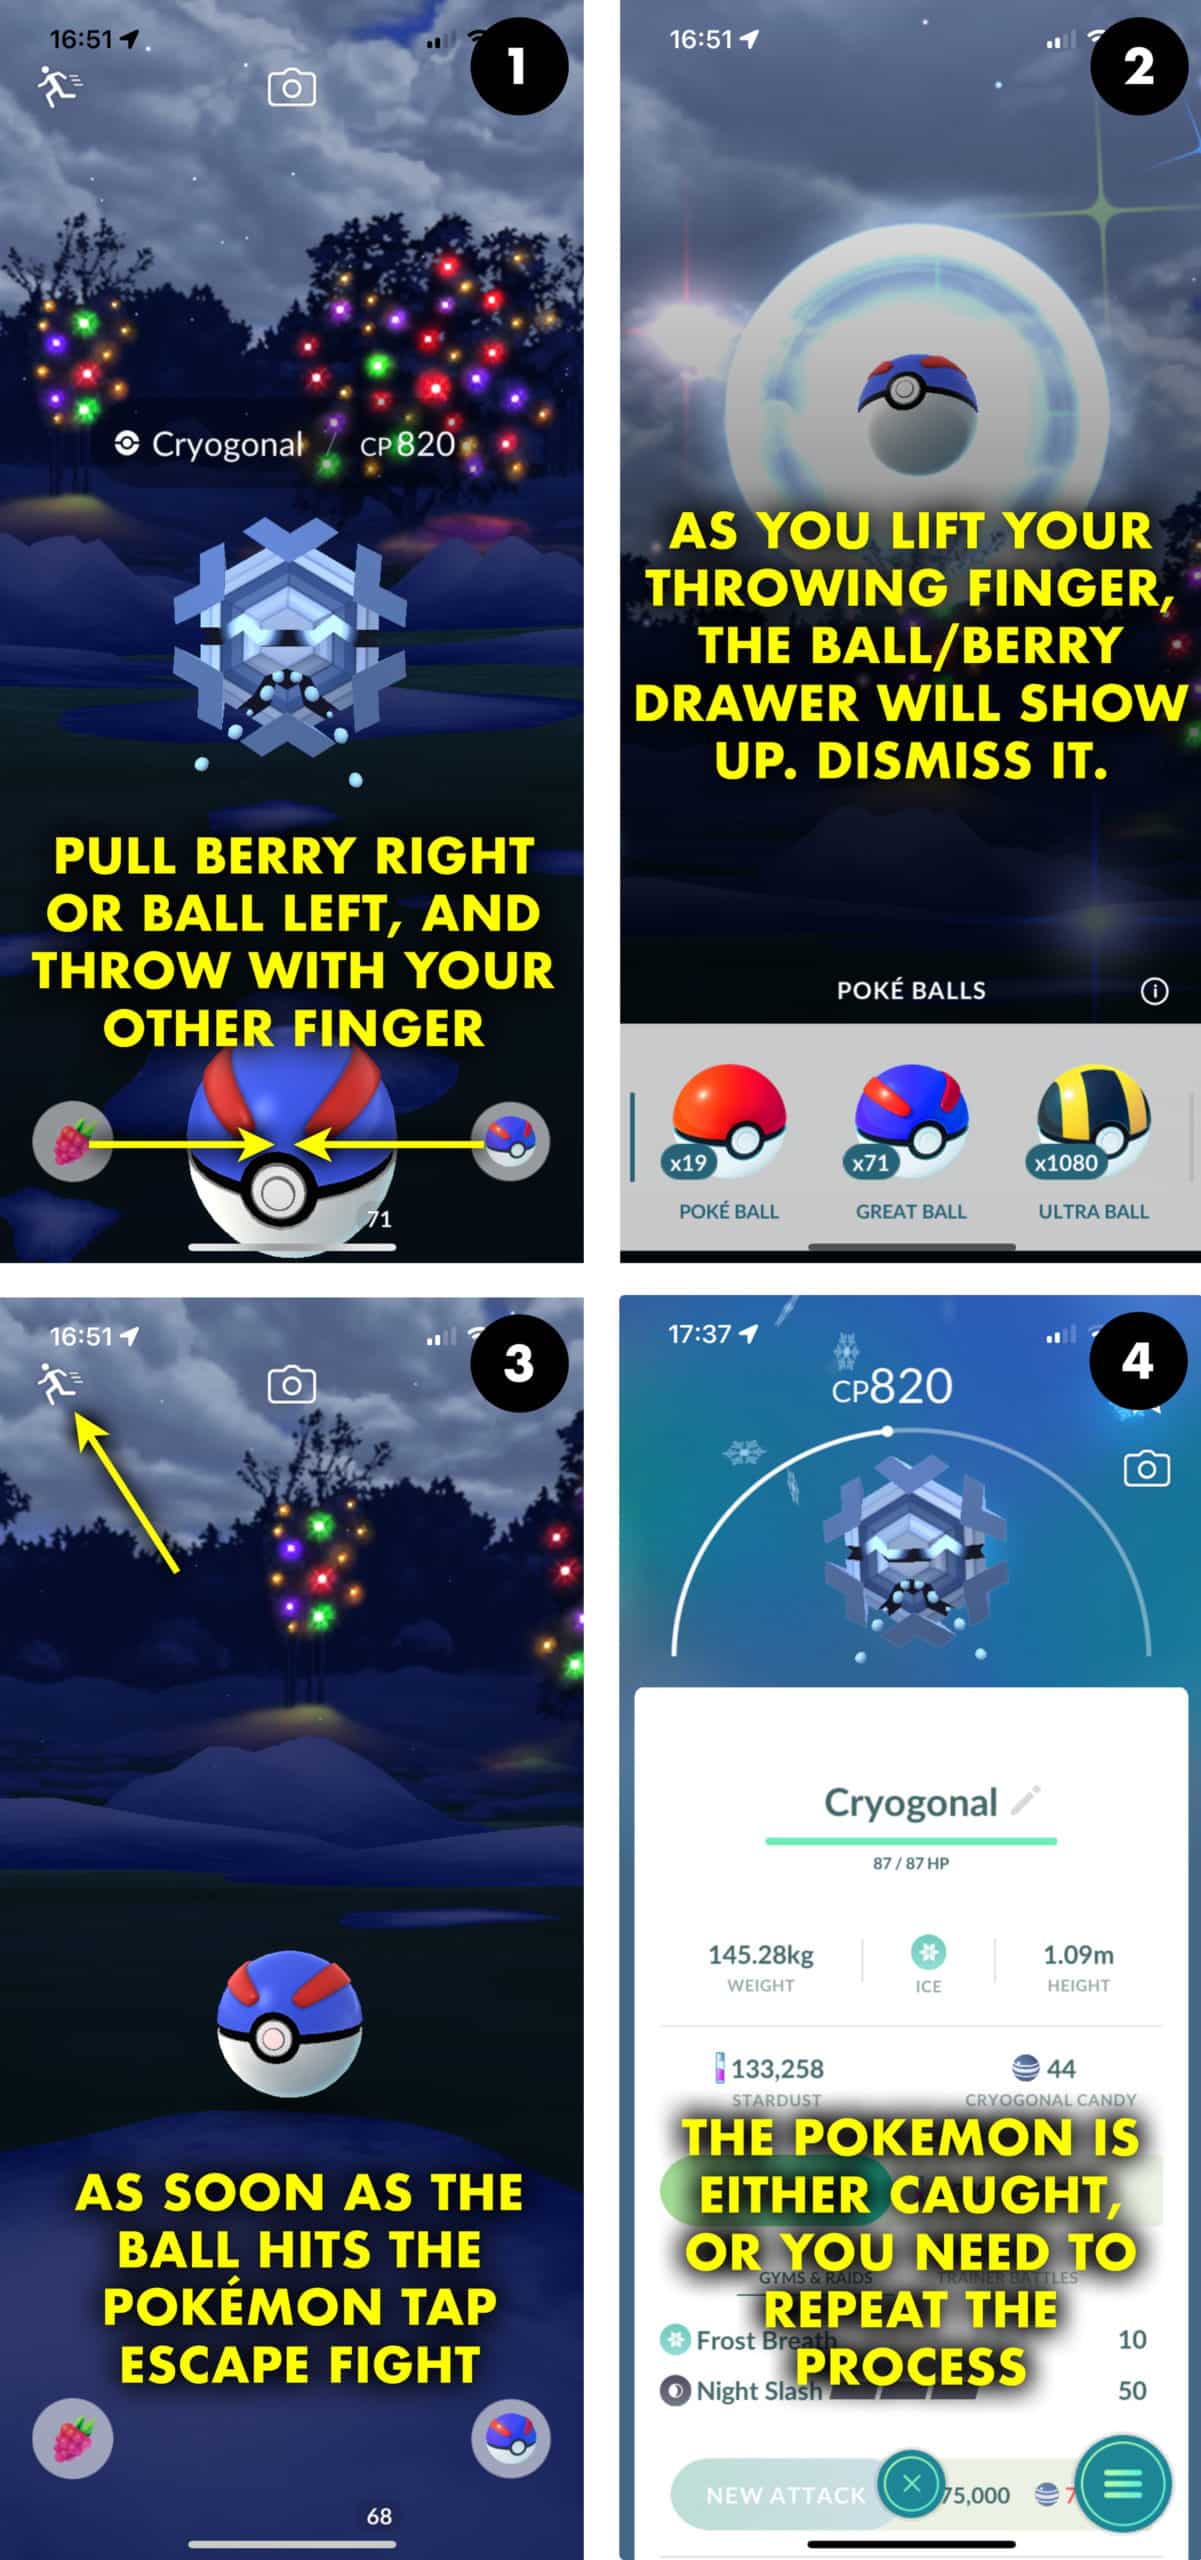 skip animations to level up faster in pokemon go